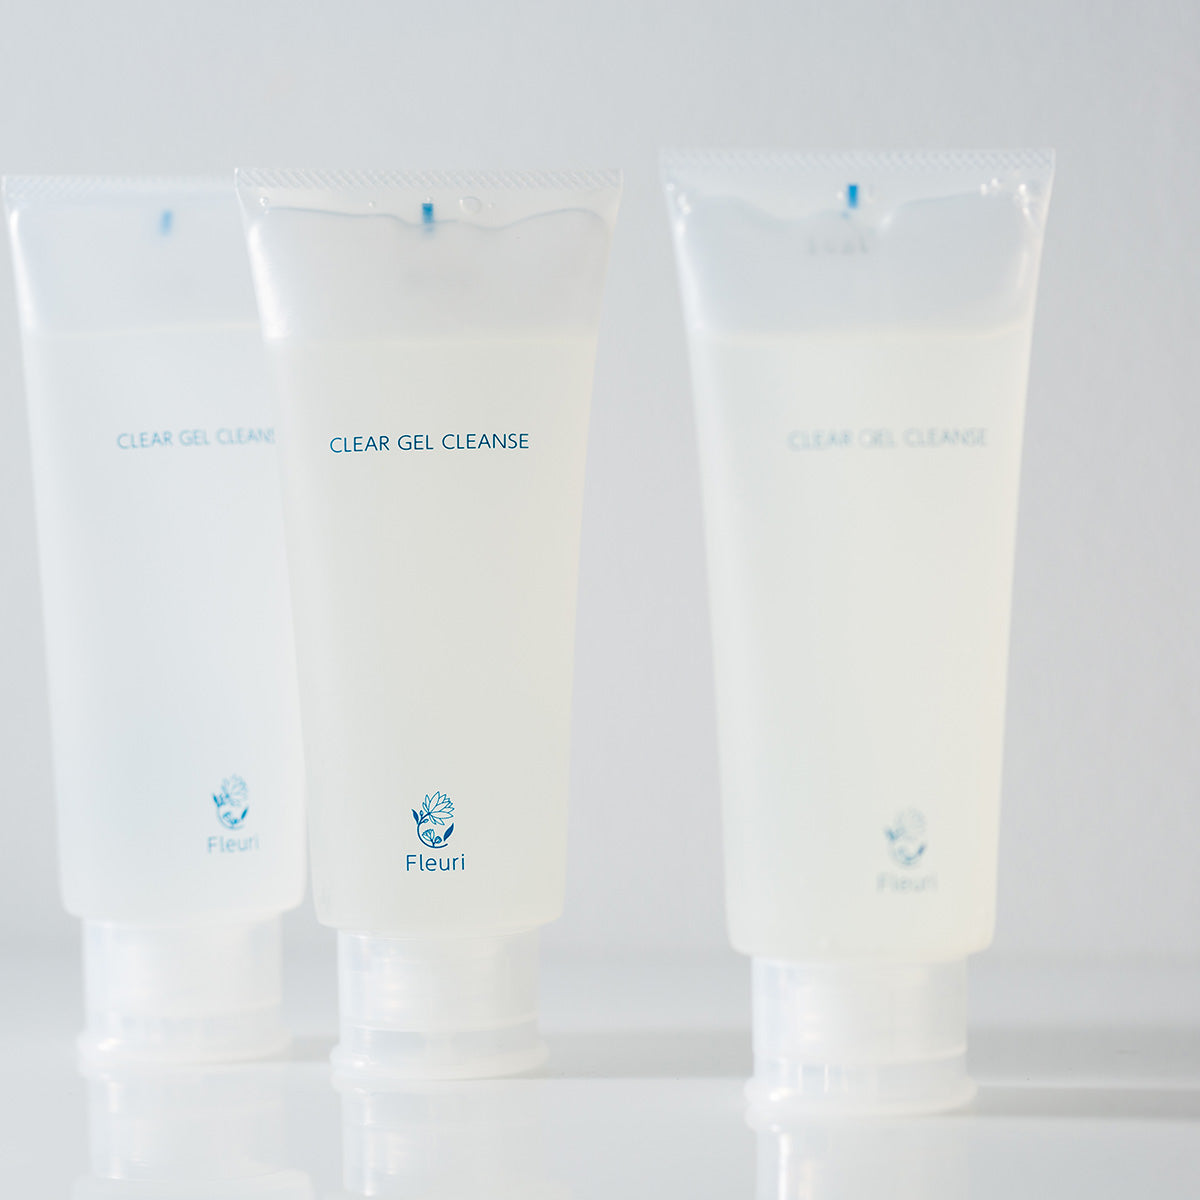 CLEAR GEL CLEANSE -Gentle Makeup Remover-